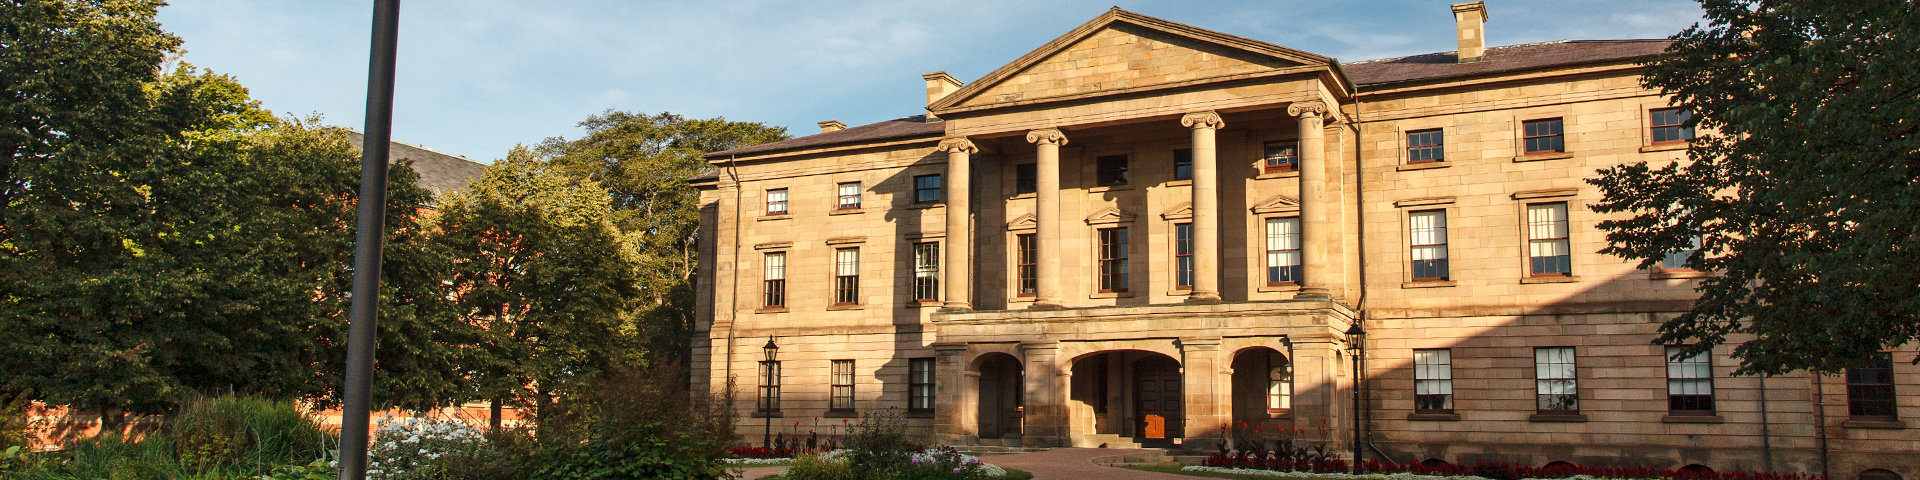 Exterior of Province House in Charlottetown PEI